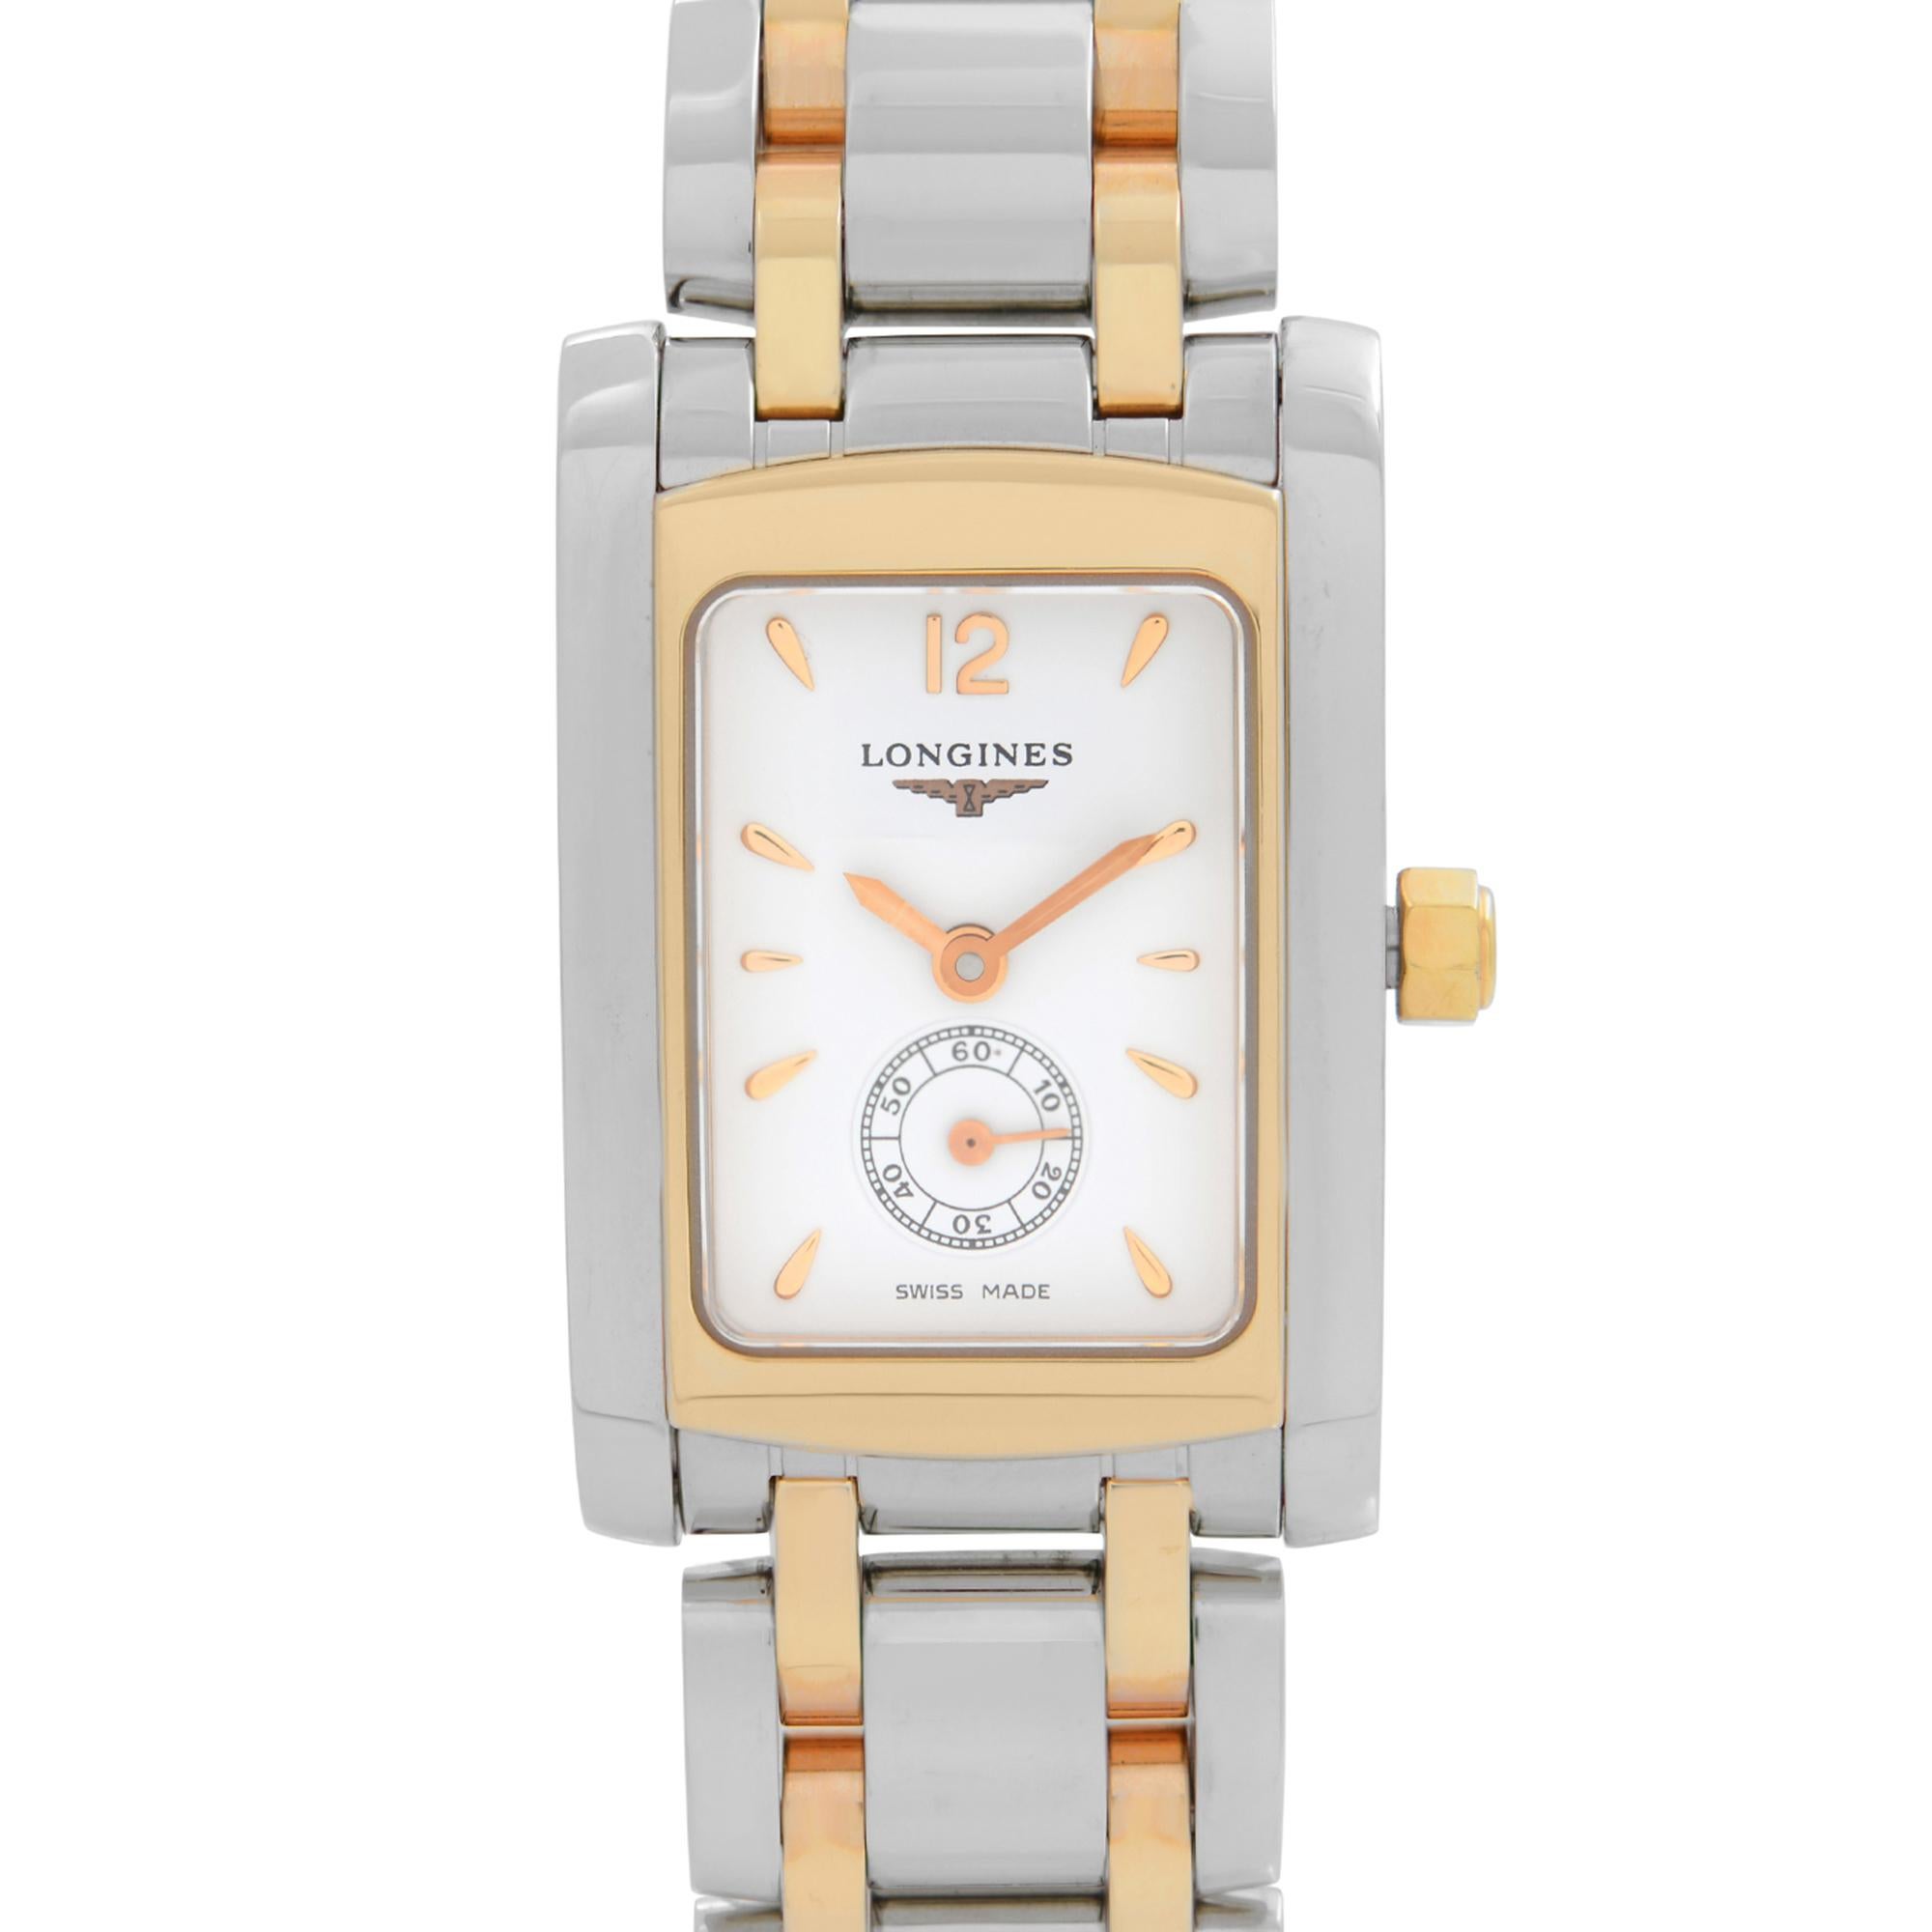 Display Model Longines Dolce Vita Two-Tone Steel White Dial Quartz Ladies Watch L5.155.5.18.7. This Beautiful Timepiece is Powered by a Quartz (Battery) Movement And Features: Rectangular Stainless Steel Case with a Two-Tone (Stainless Steel & Rose